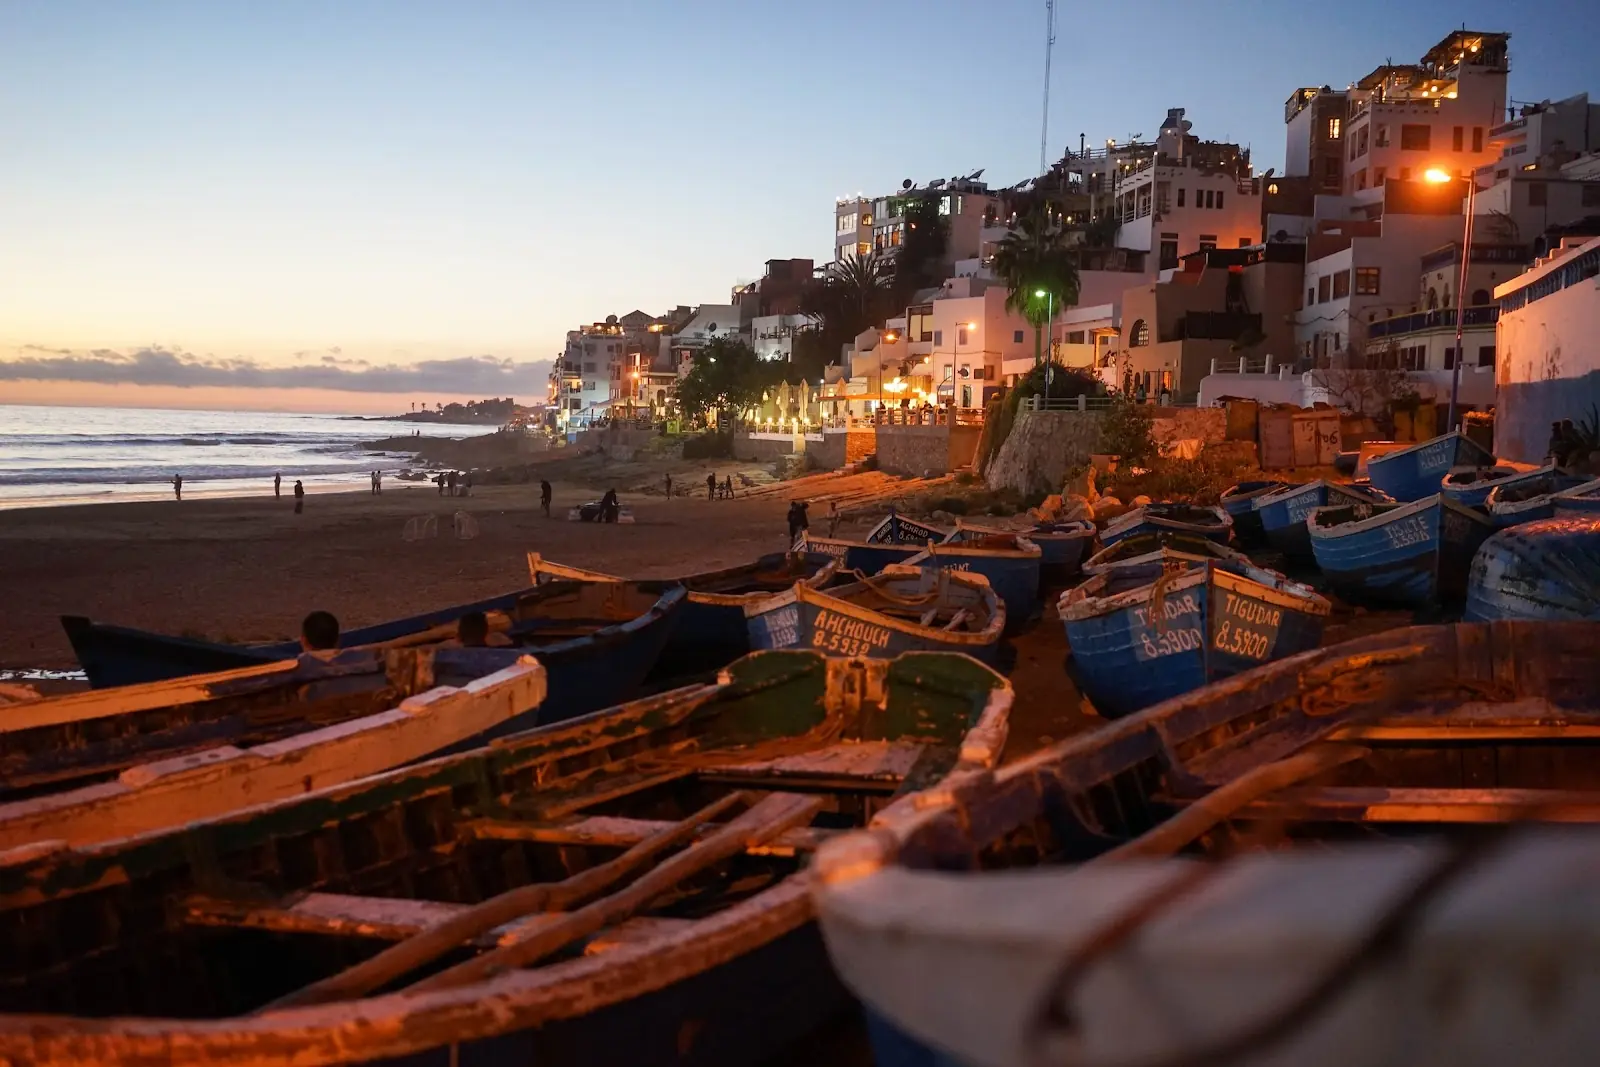 Sunset on a Moroccan beach, overlooking fishing boats and a small village.